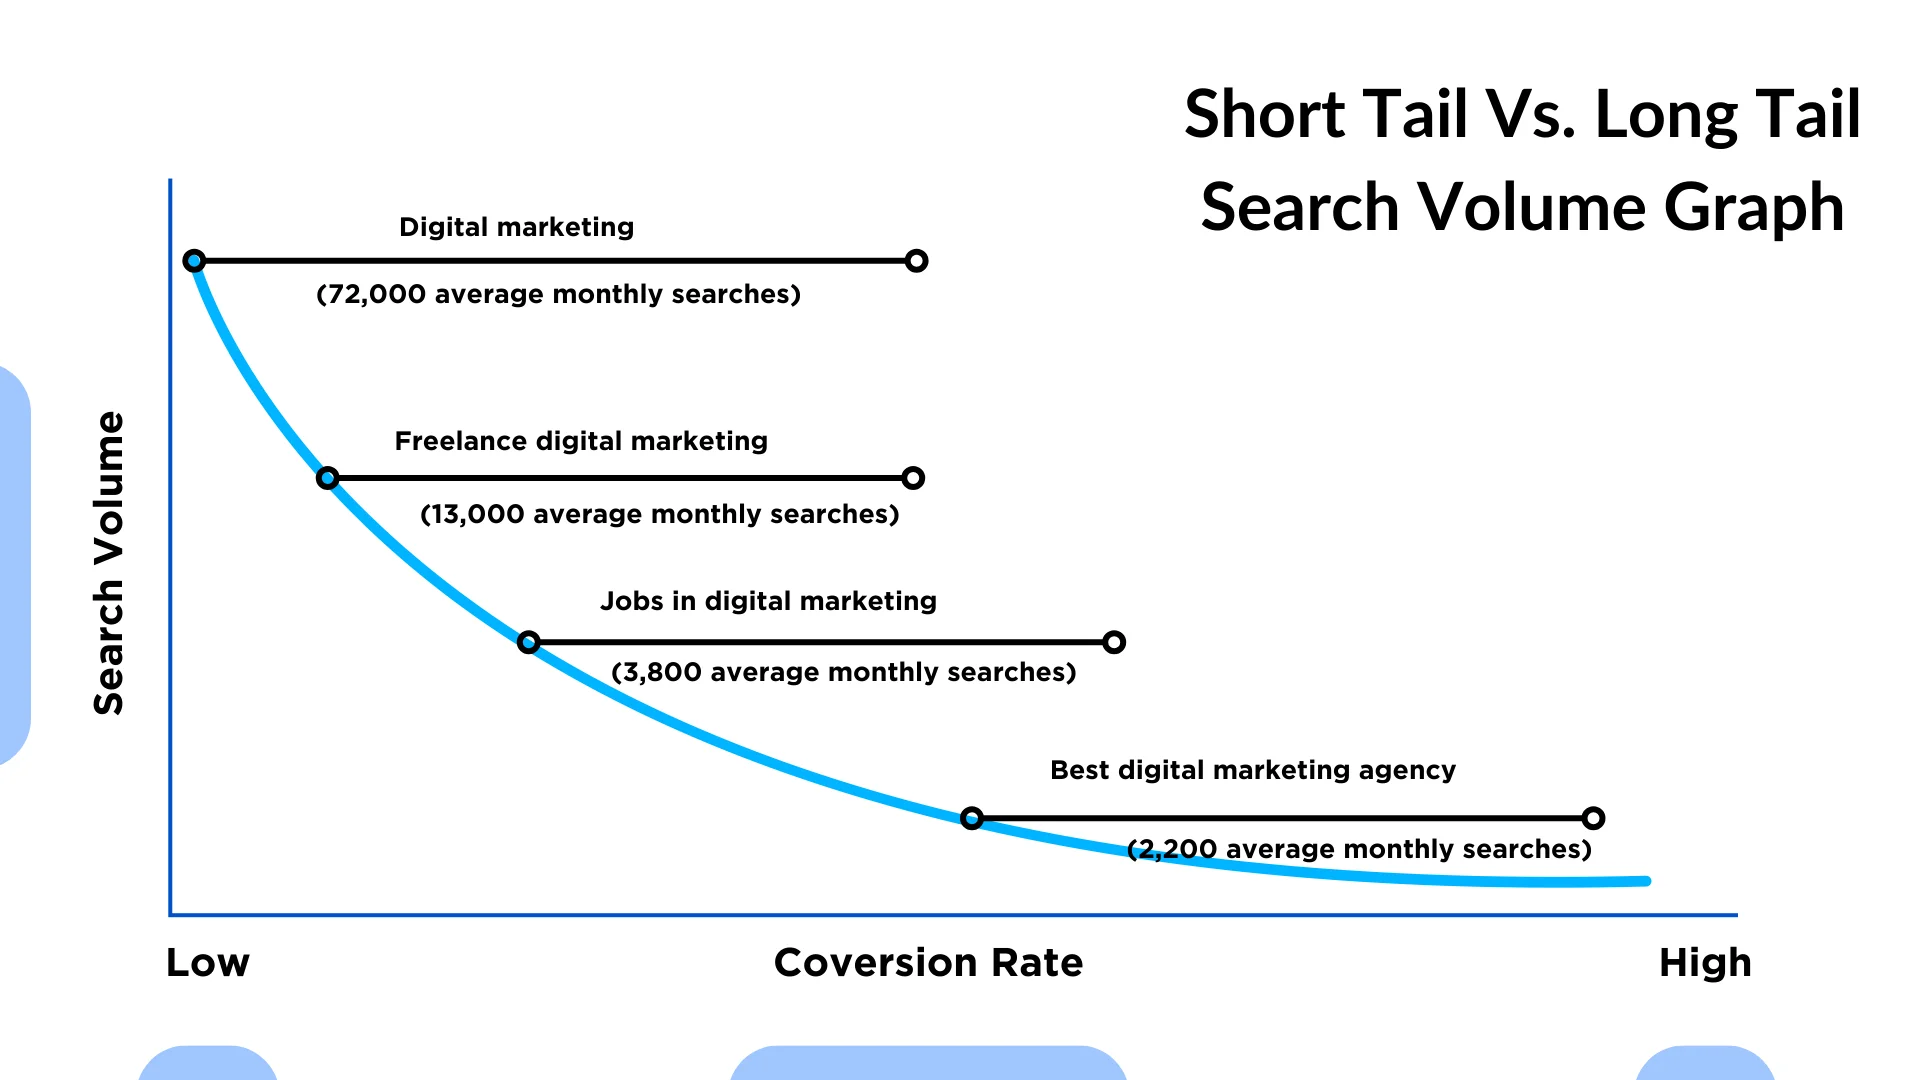 A line graph depicting the average monthly search volumes of long tail and short tail keywords